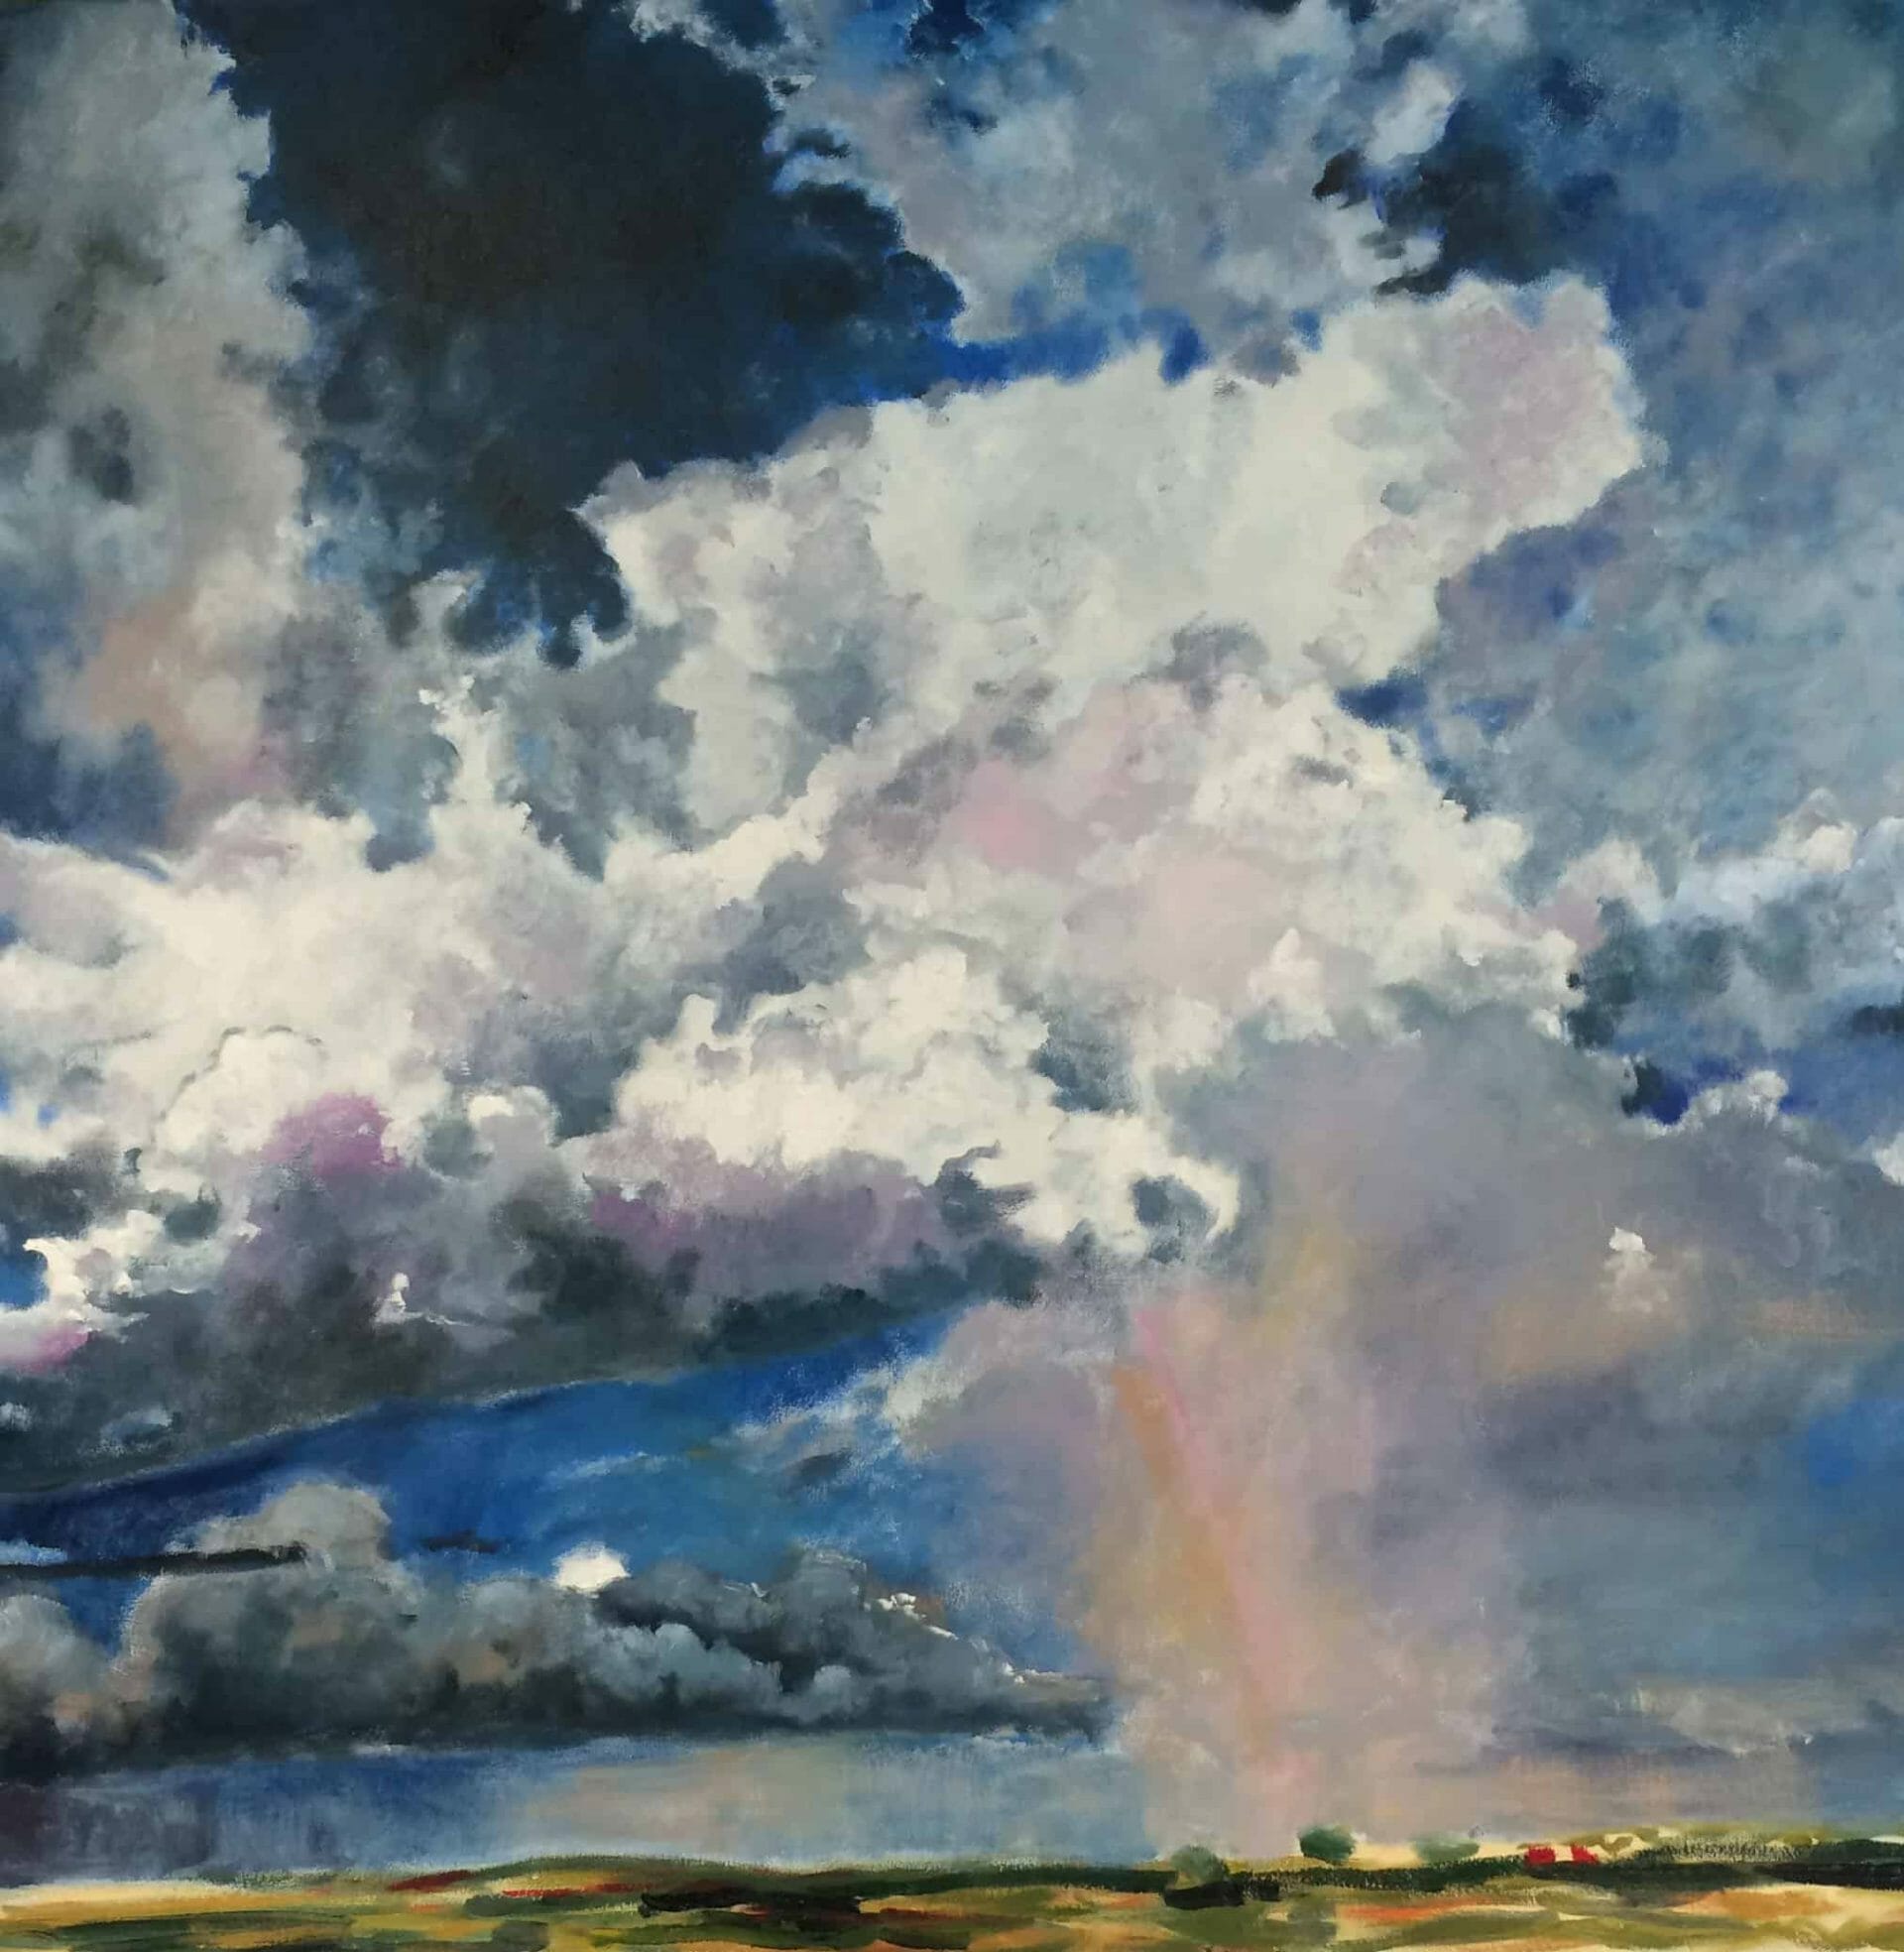 Clouds Aloft - Canadian Original Artwork For Sale by Patricia Neden - Calgary, AB Local Artist - Sky & Water Art - Oil on Canvas